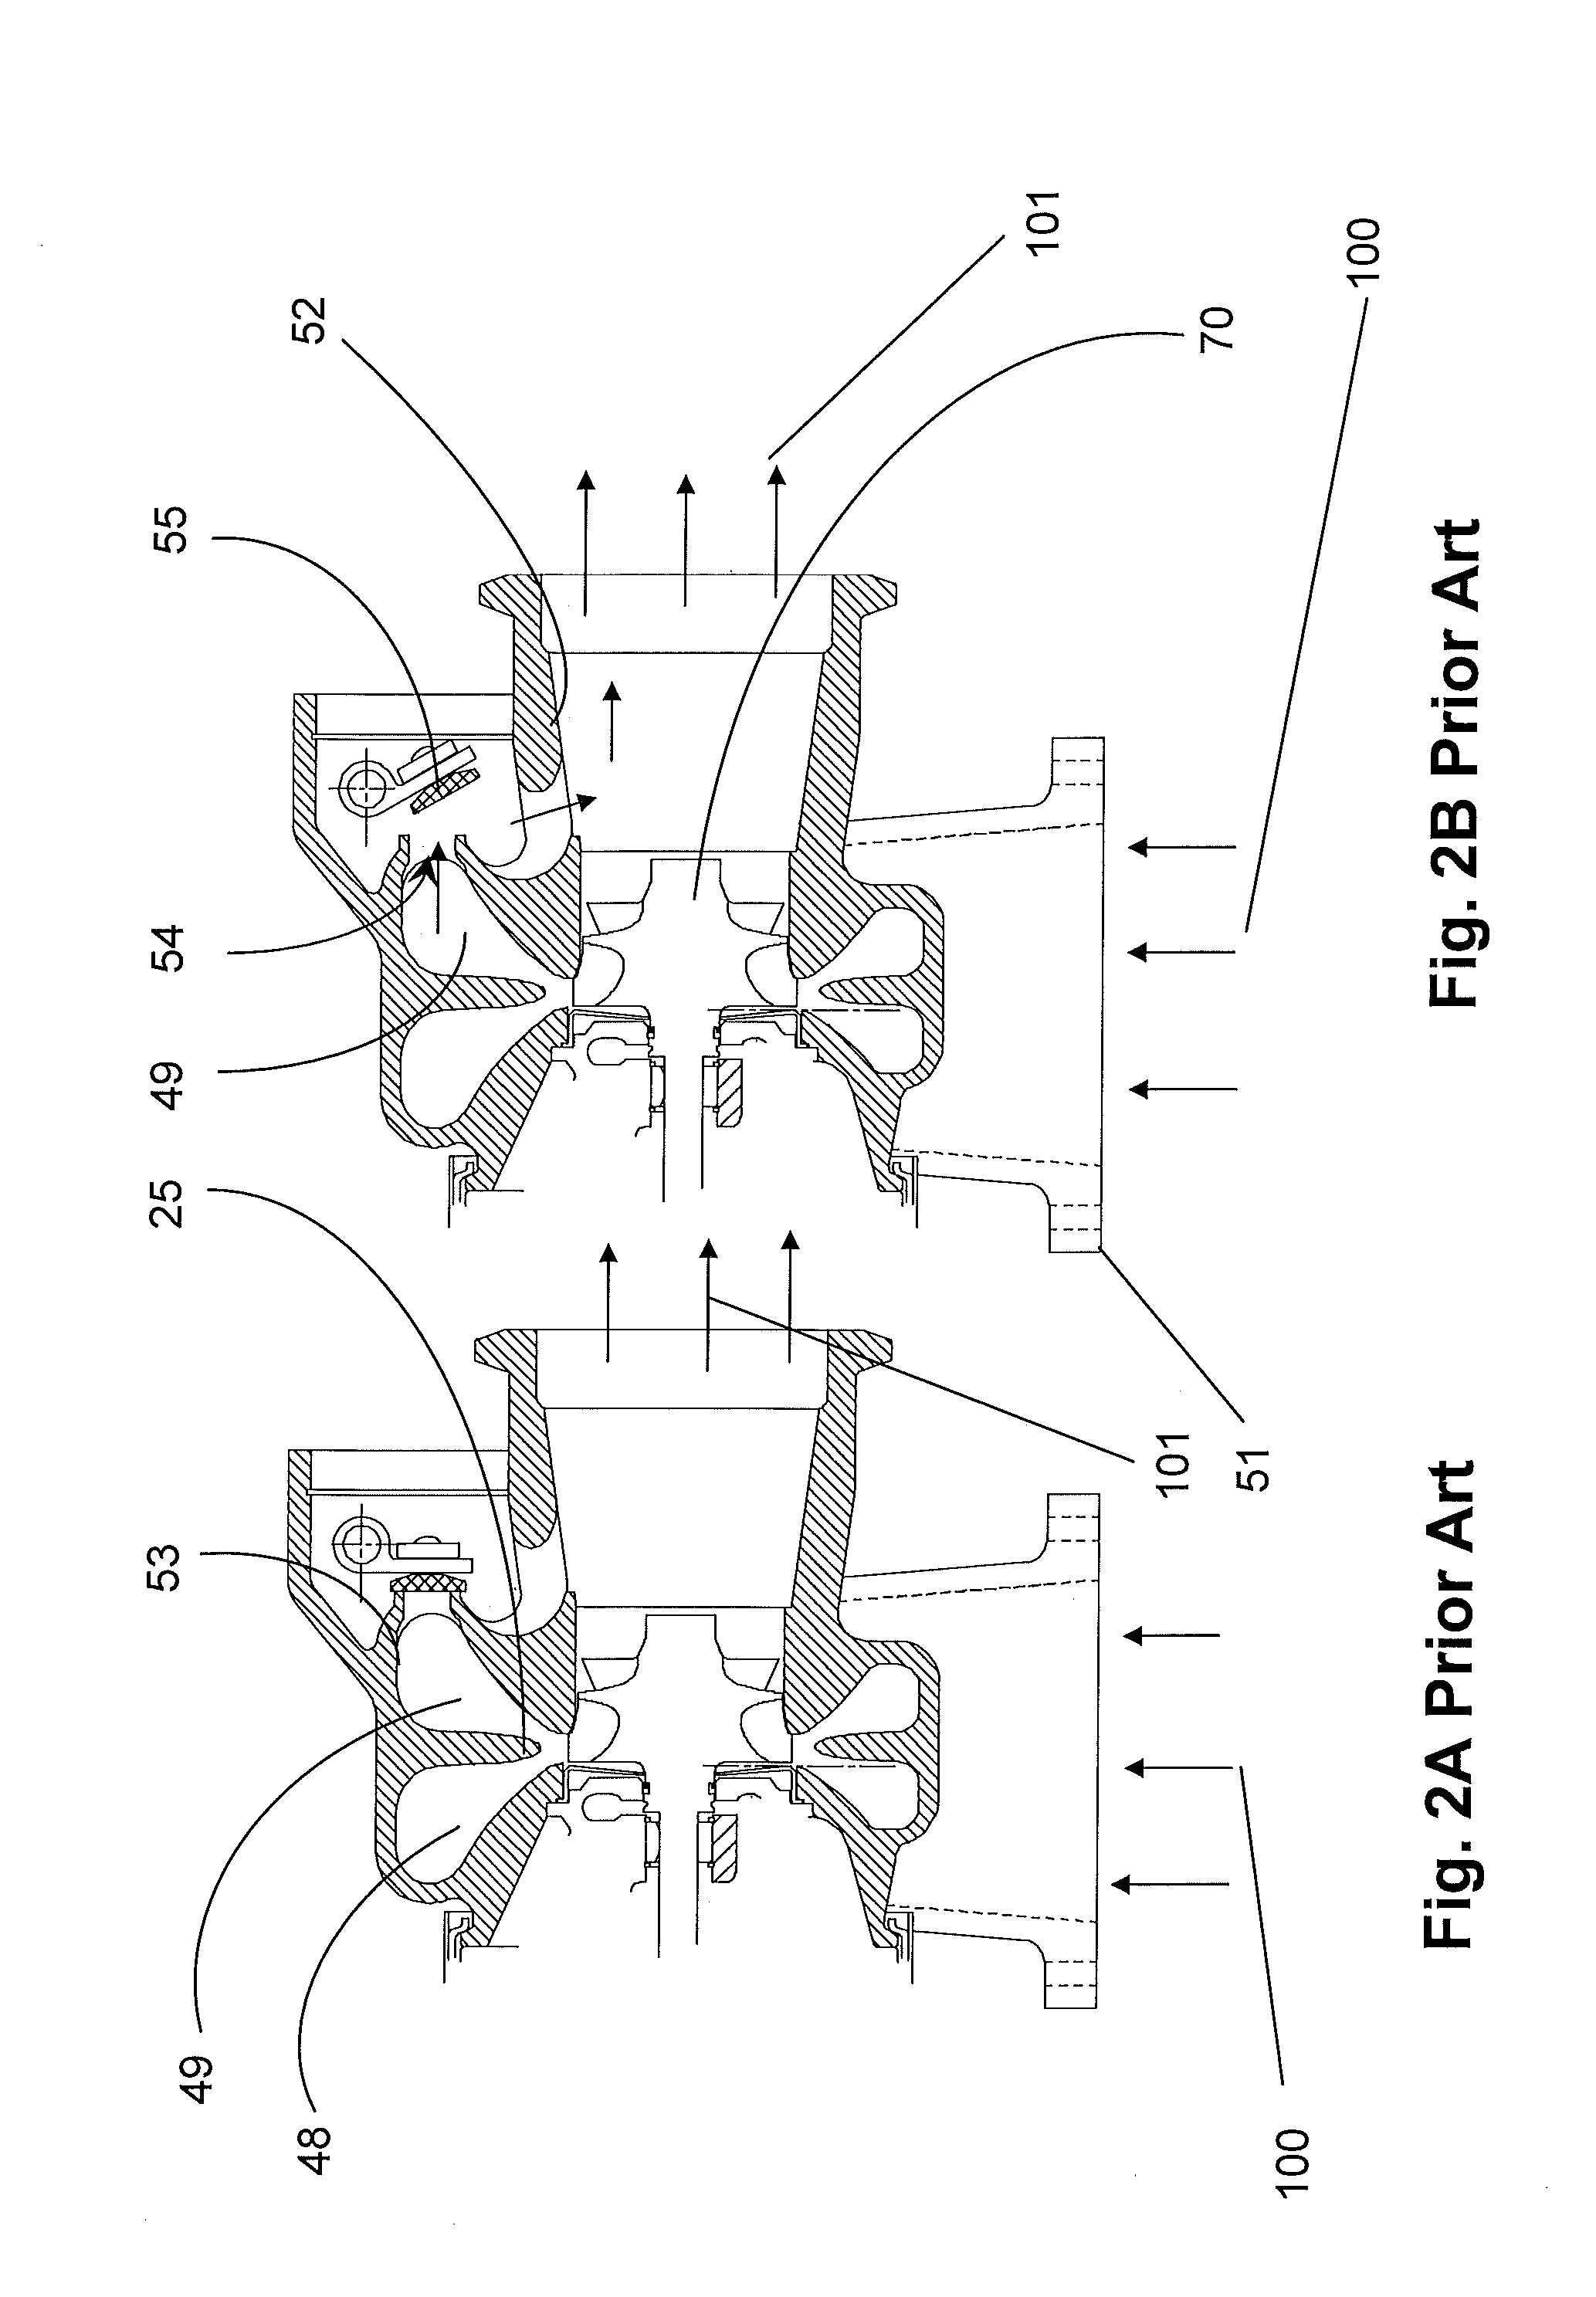 Simplified variable geometry turbocharger with increased flow range